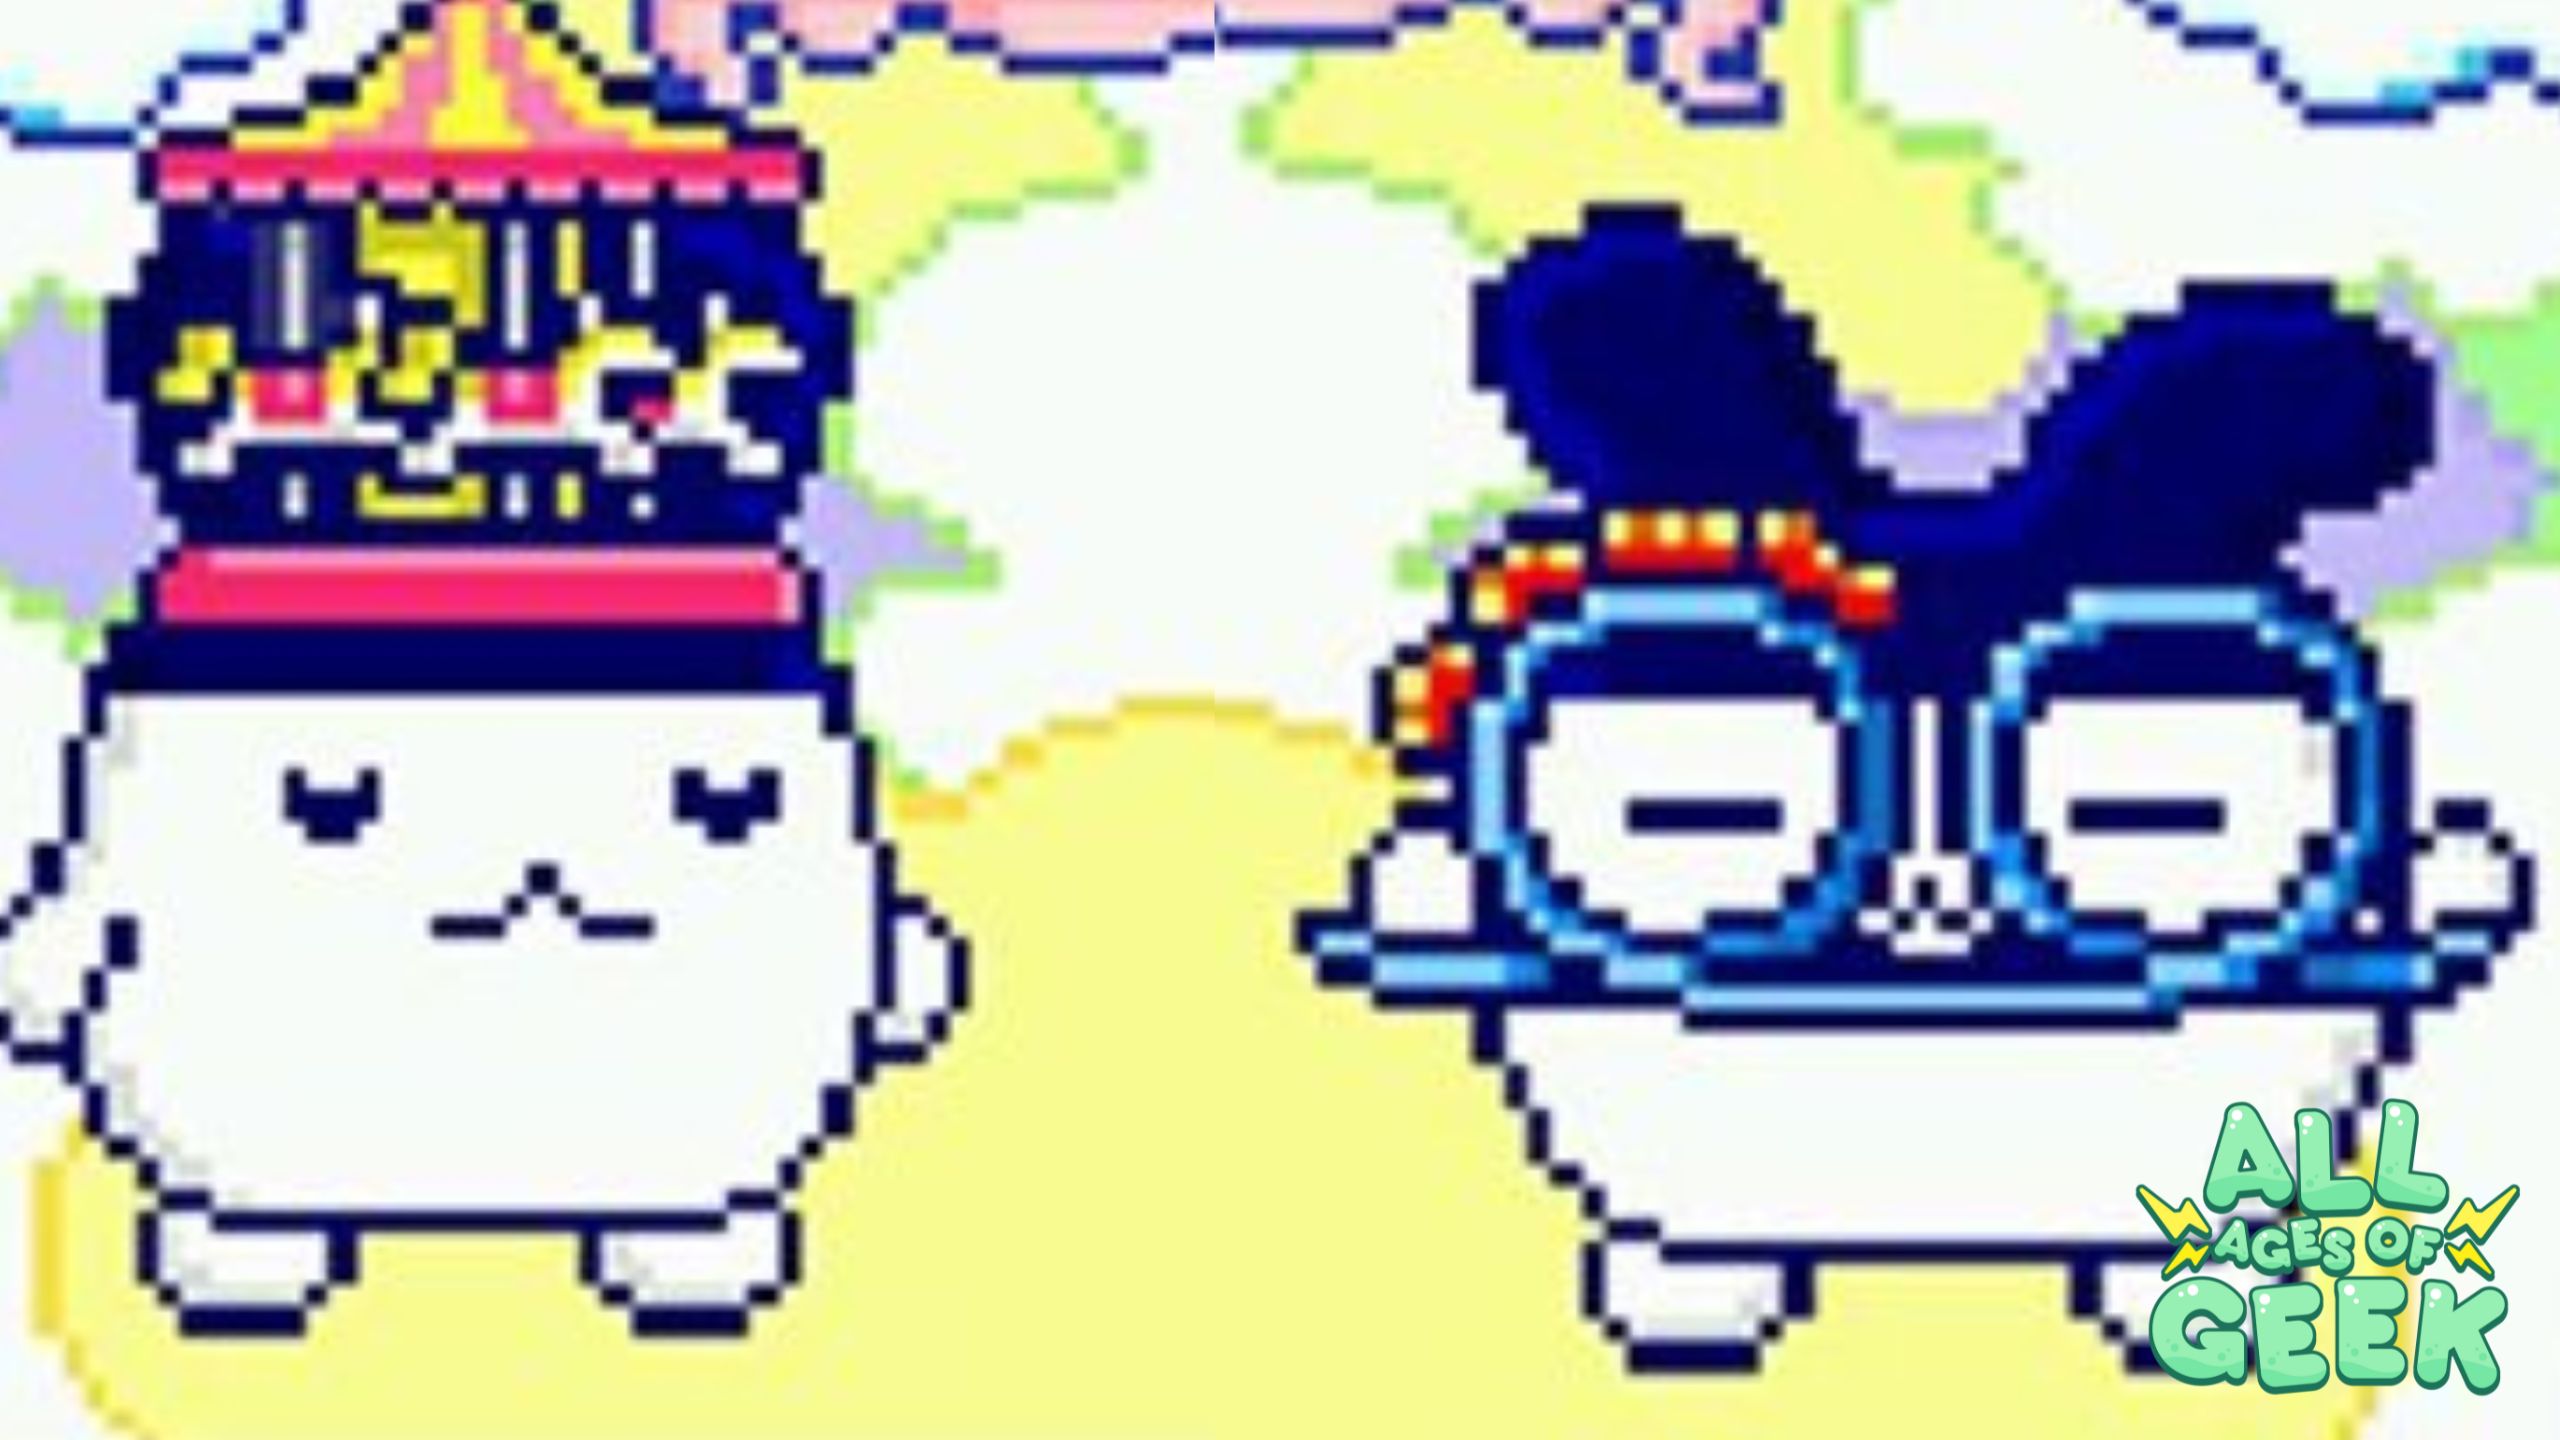 Tamagotchi Uni characters sporting new accessories: the Merry Go Round Hat on the left and the Coaster Glasses on the right. The All Ages of Geek logo is visible in the bottom right corner.